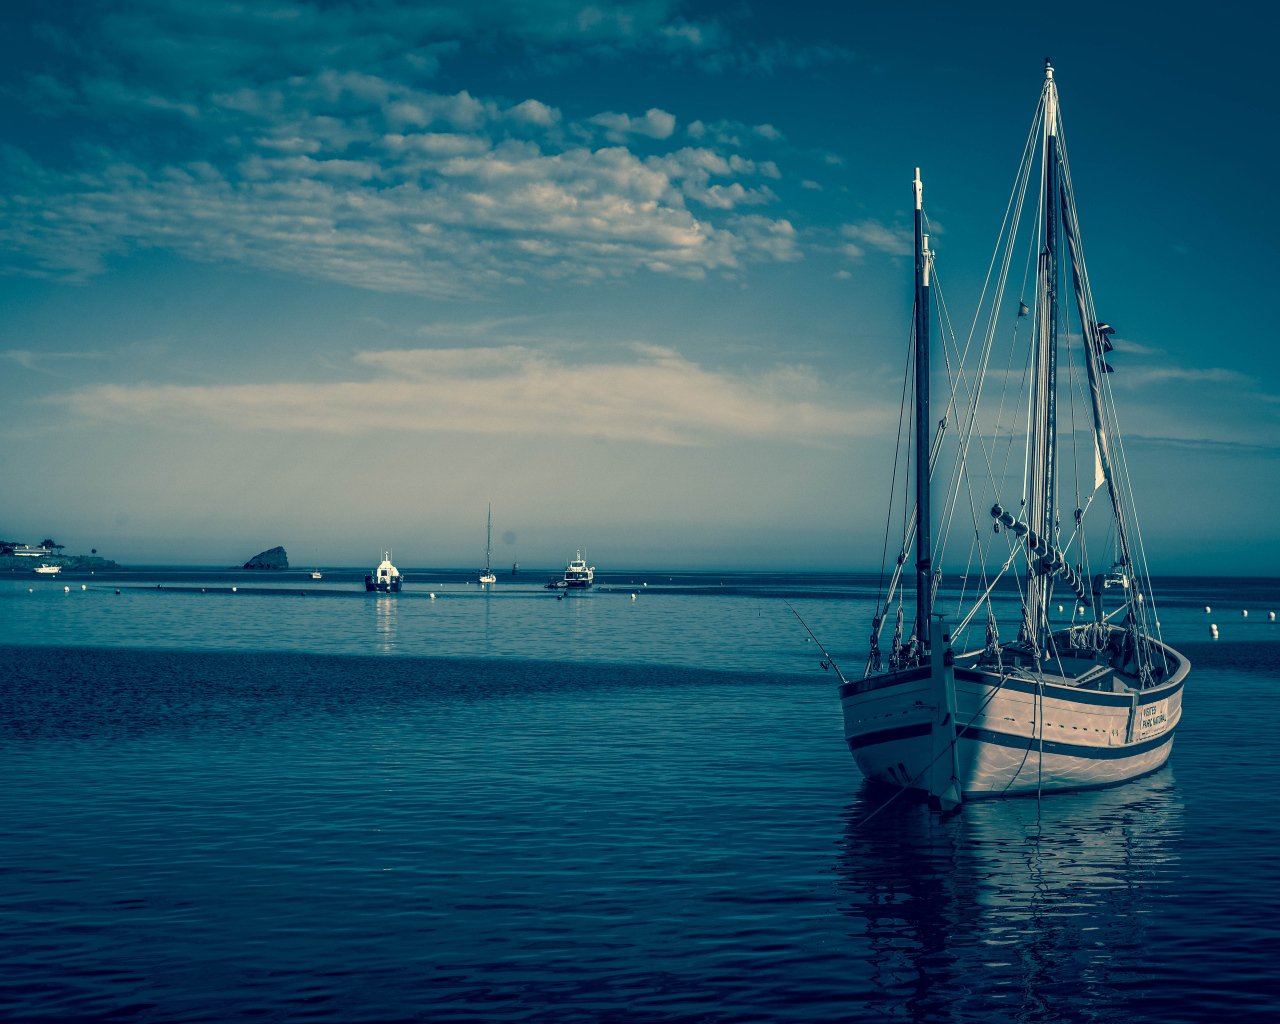 Sailing boat in the port at dusk